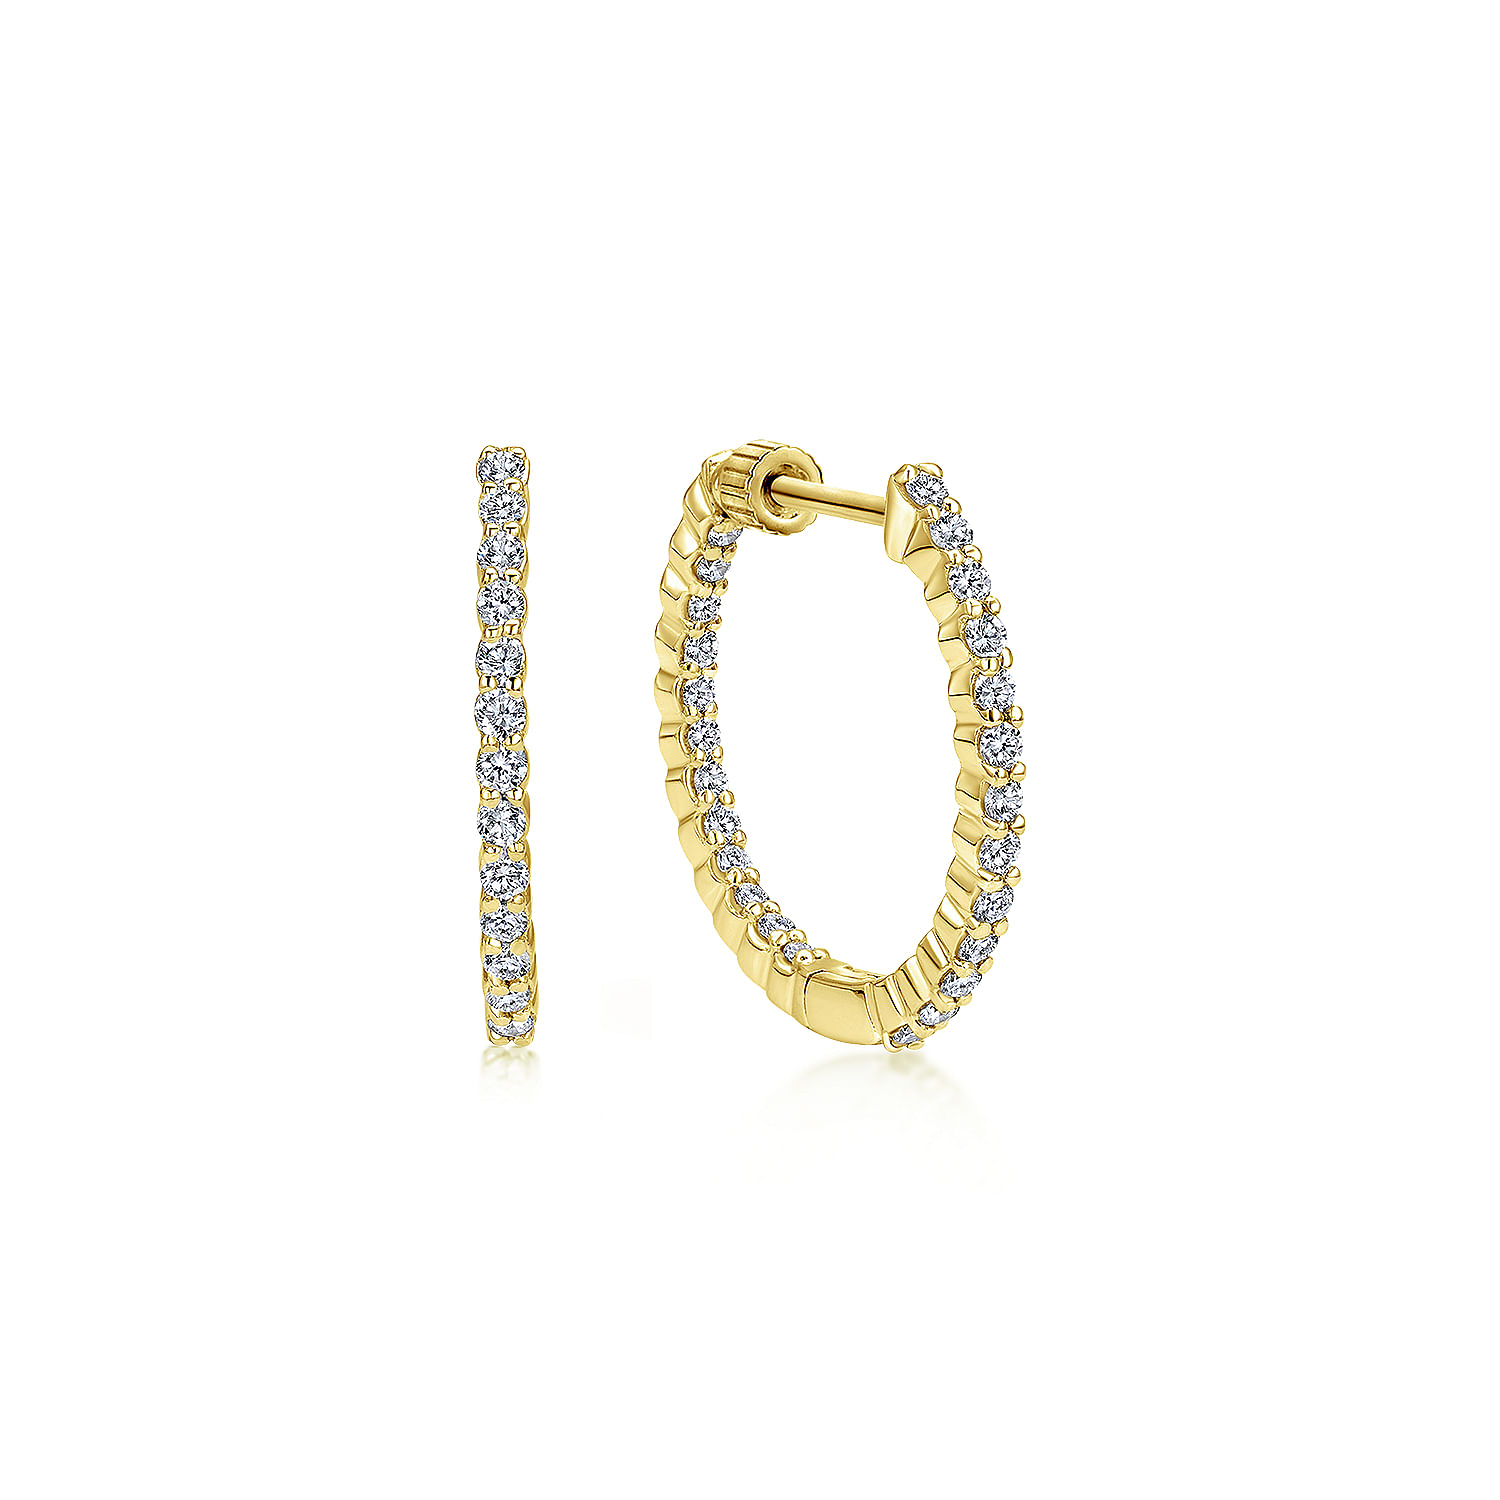 14K Yellow Gold 20mm Round Inside Out Diamond Hoop Earrings